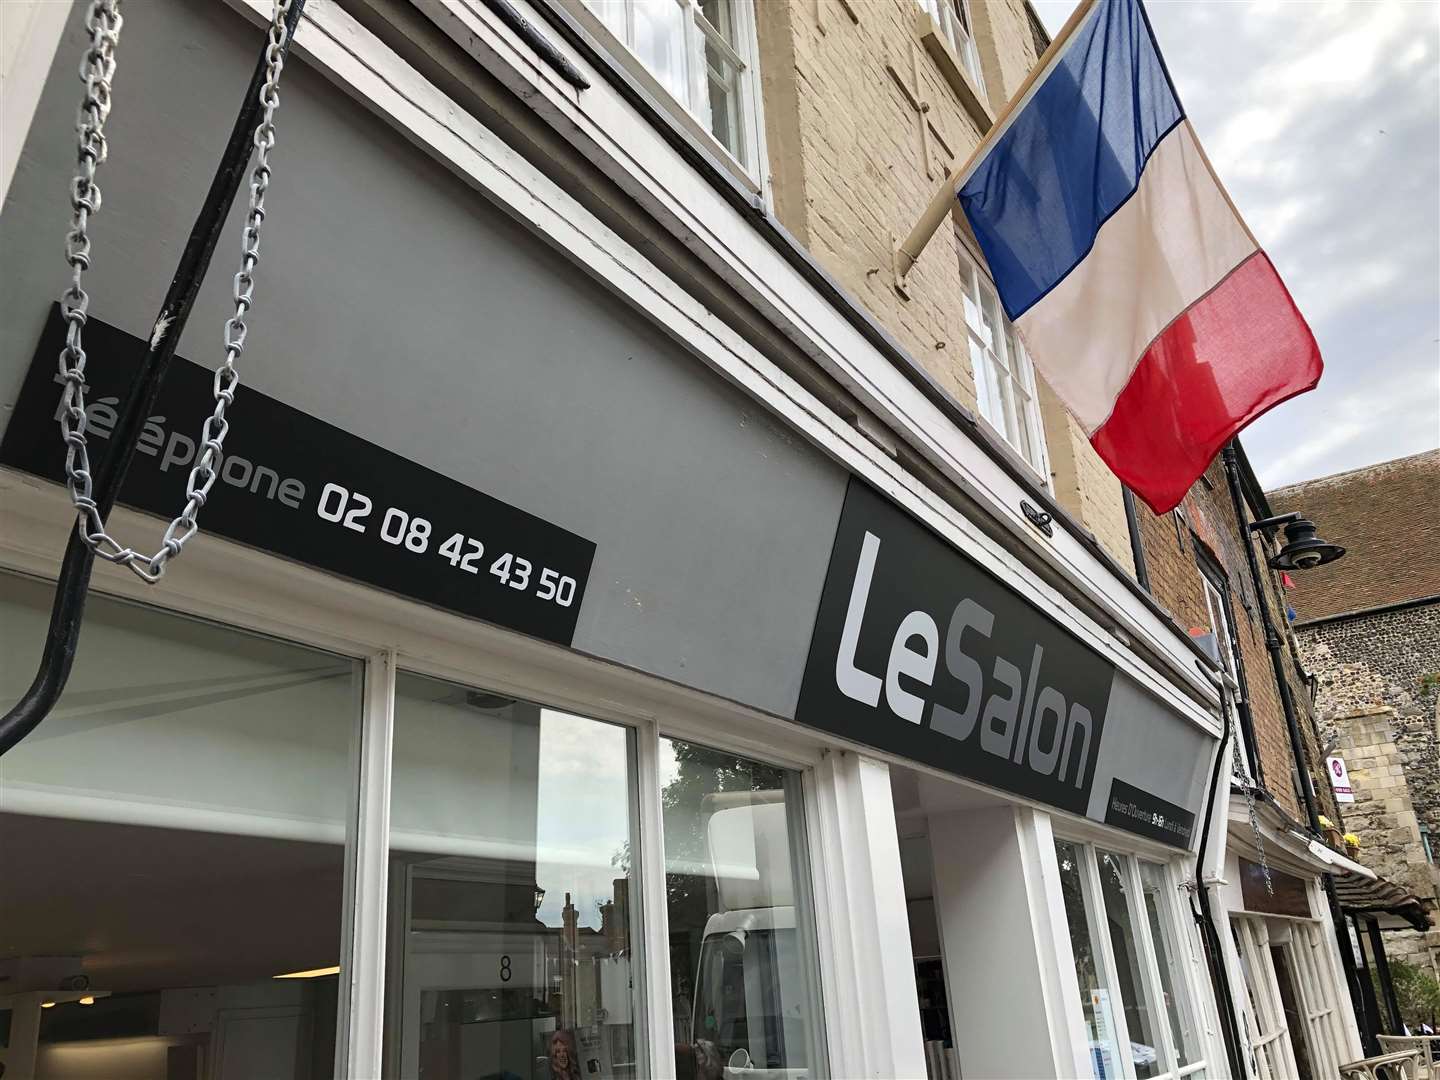 The Salon in Market Street, Sandwich, is given a new name - Le Salon